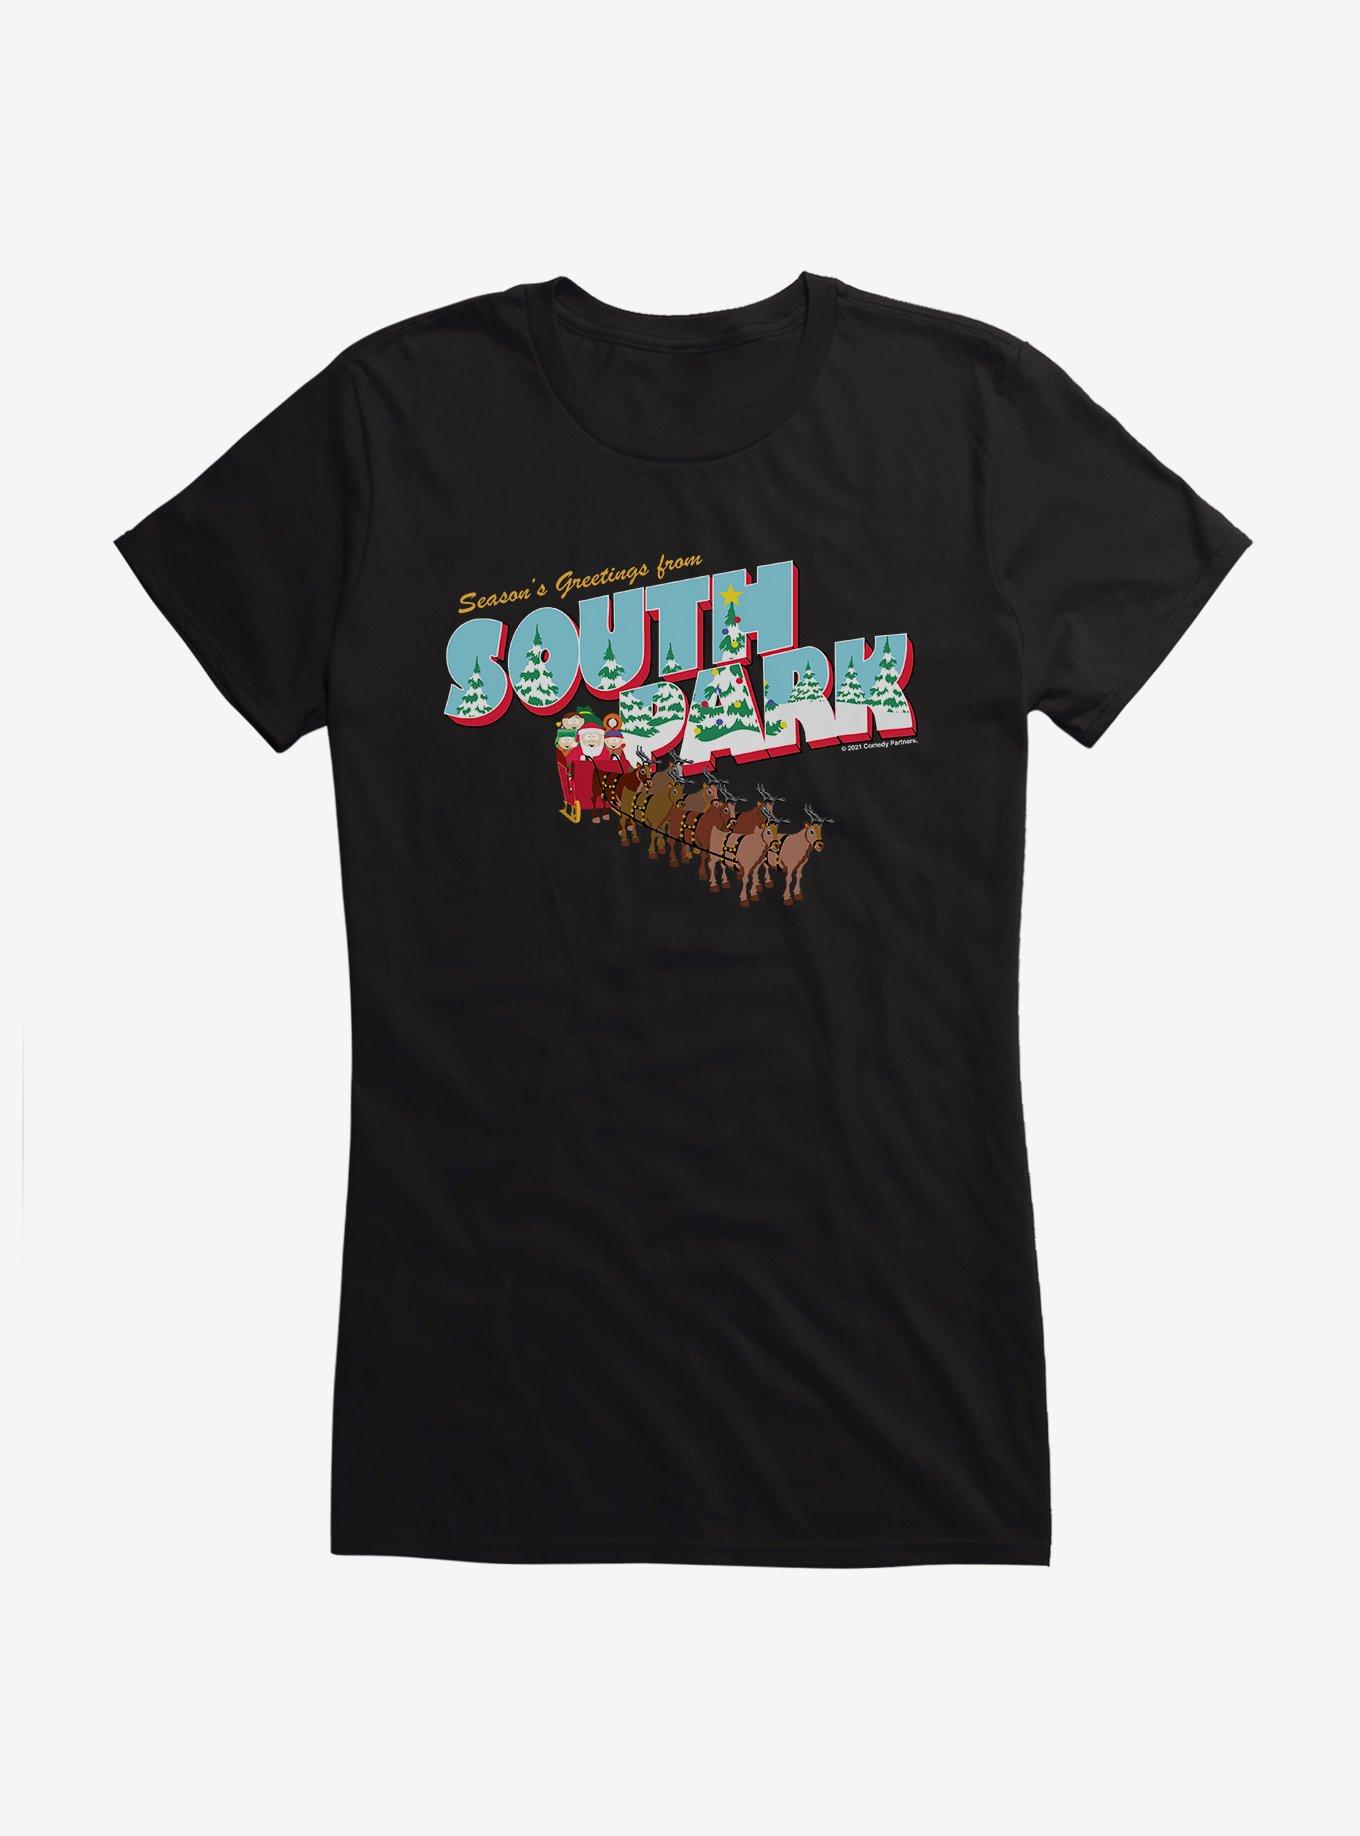 South Park Christmas Guide On the Roof Girls T-Shirt